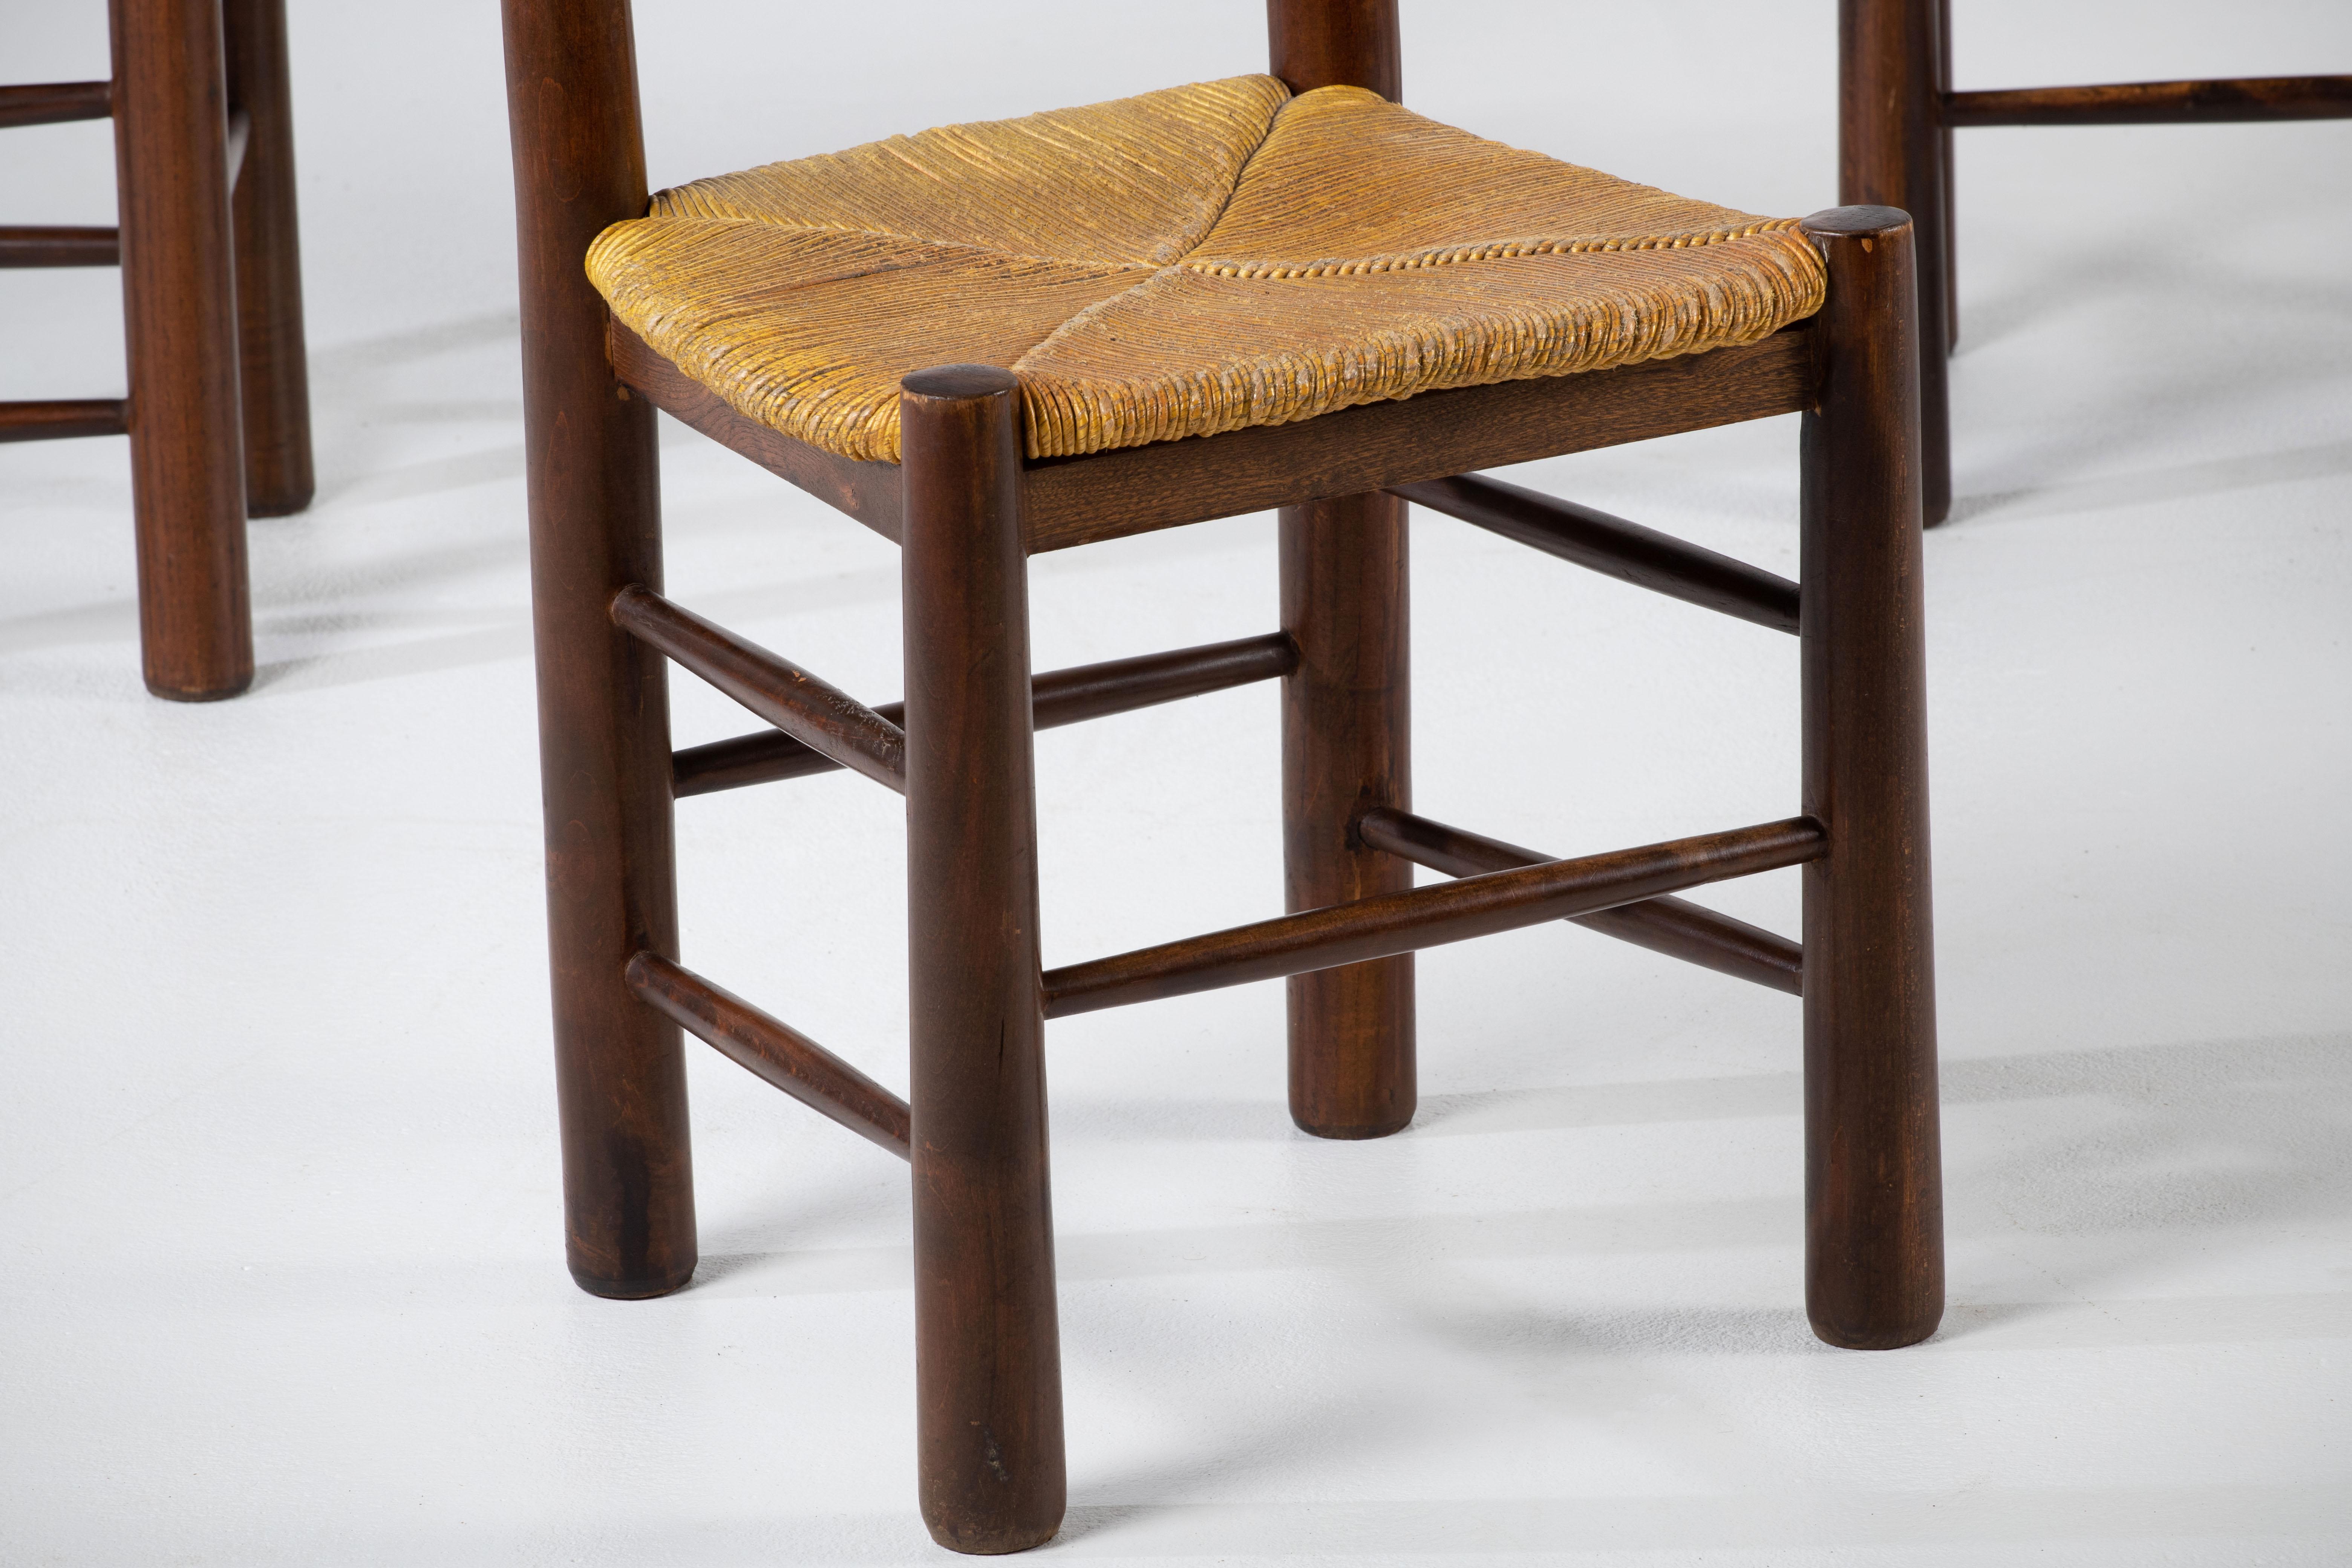 Oak Mid-Century Set of 6 Chairs in style of Perriand, France, 1940 For Sale